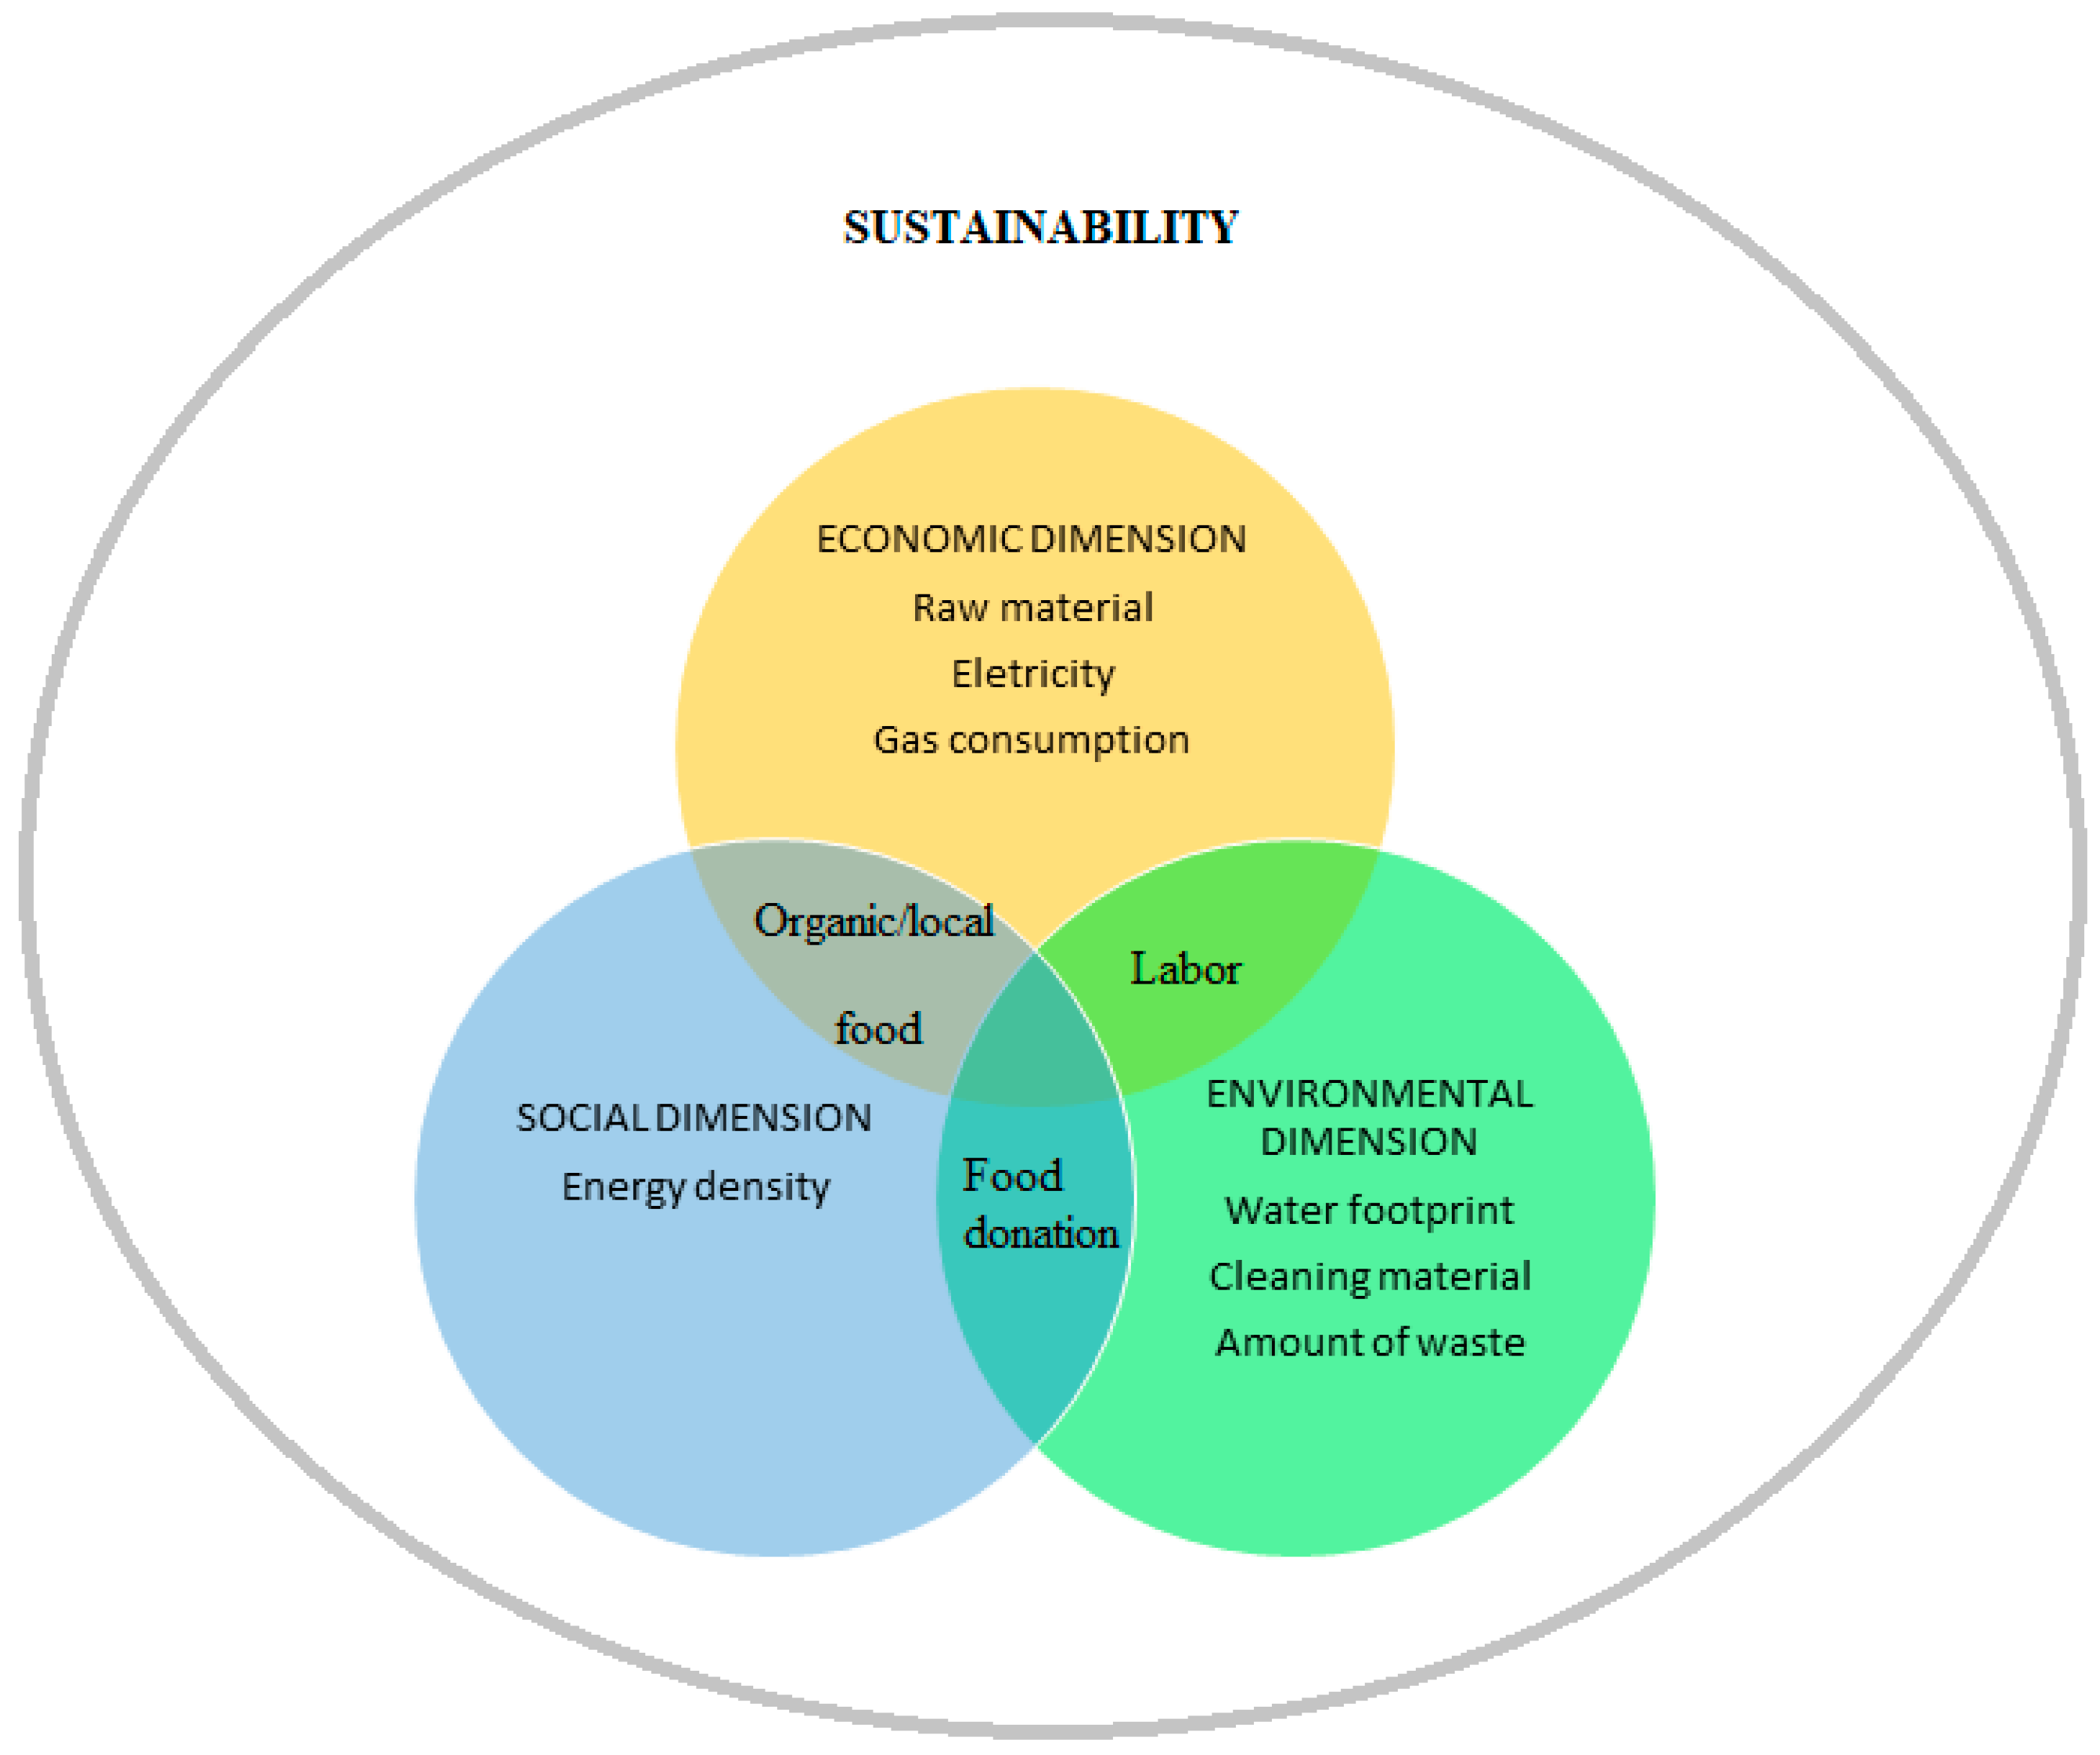 Foods | Free Full-Text | Food Waste on Foodservice: An Overview through the Perspective of Sustainable Dimensions | HTML